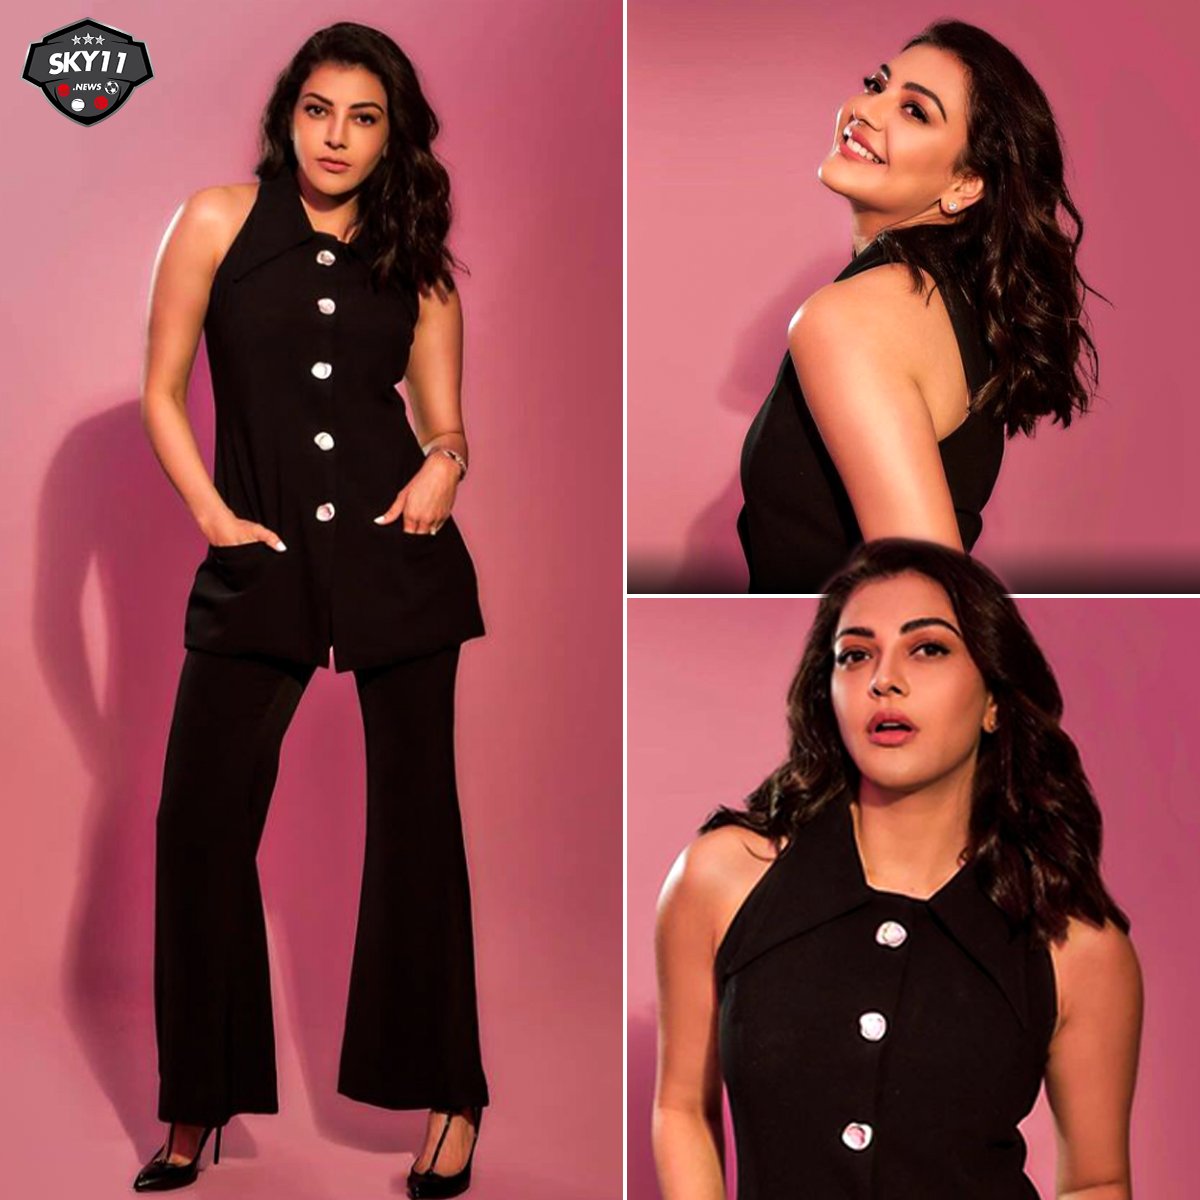 Kajal Aggarwal flaunts her beauty in the elegant black Fable Street V Neck Buttoned Top.

Photo Source - Kajal Aggarwal/Instagram 

#KajalAggarwal #SKY11 #Bollywood #BollywoodViral #PhotoShoot #Viral